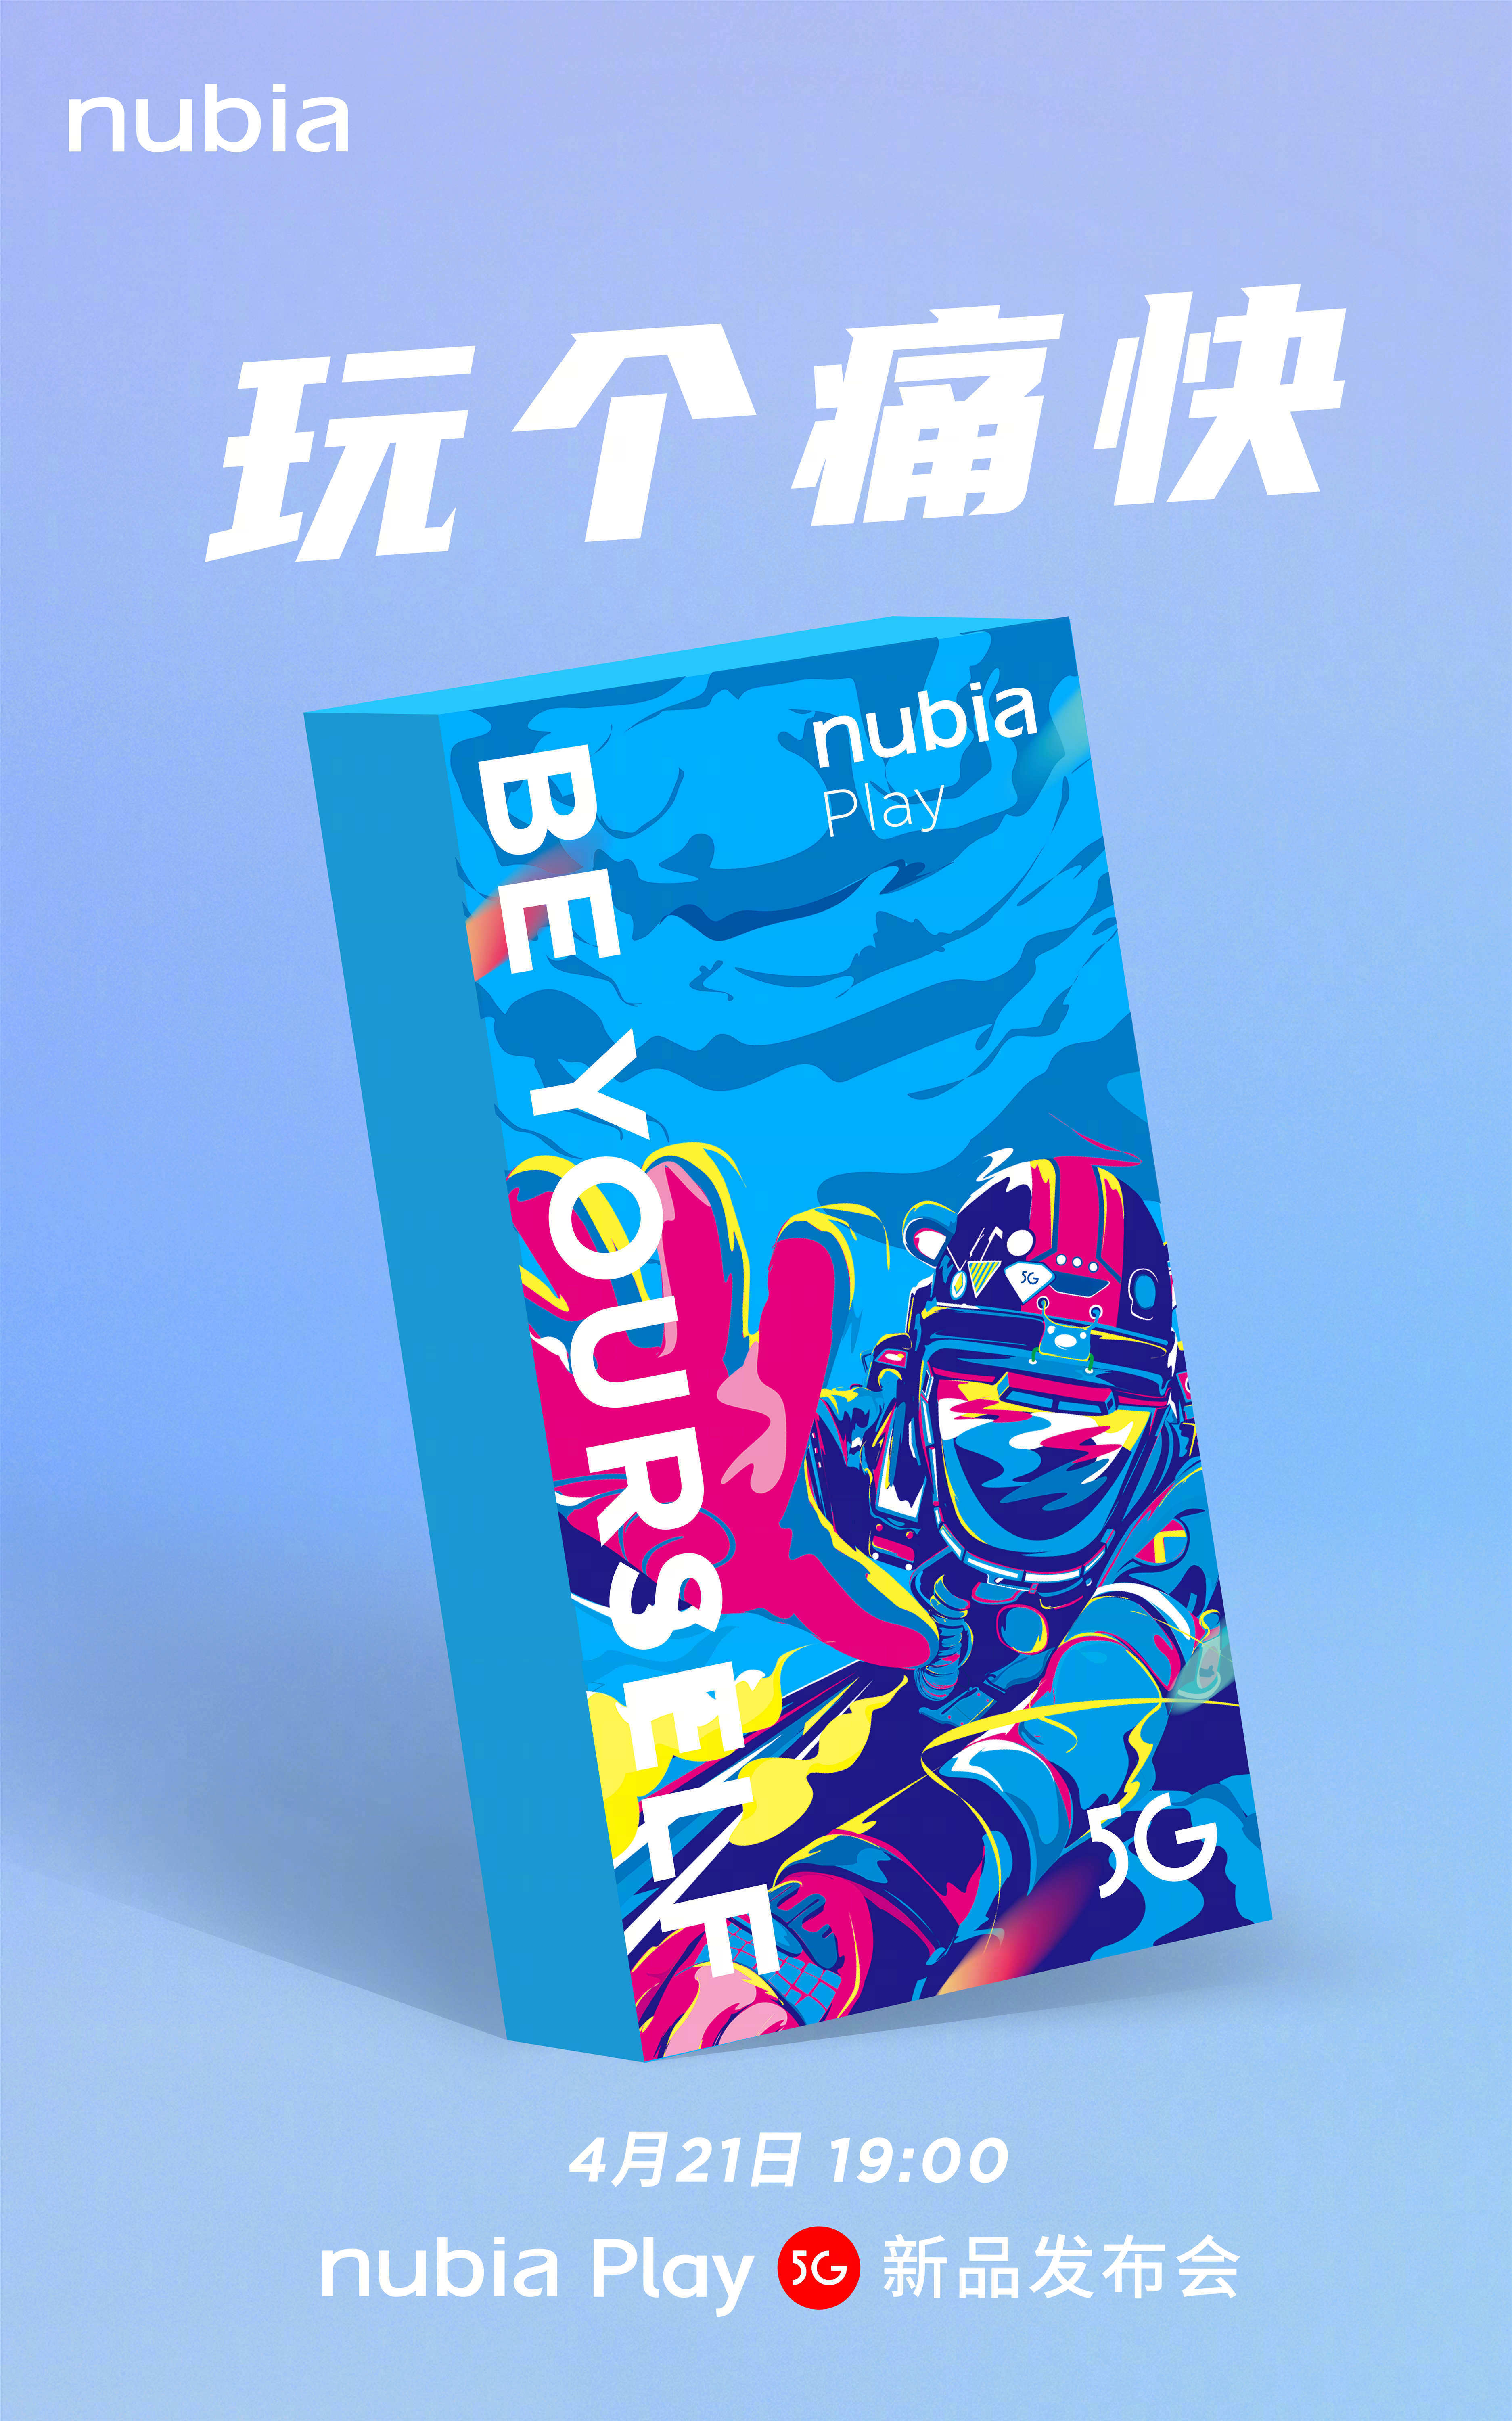 Nubia Play to bring 5G capabilities to the masses